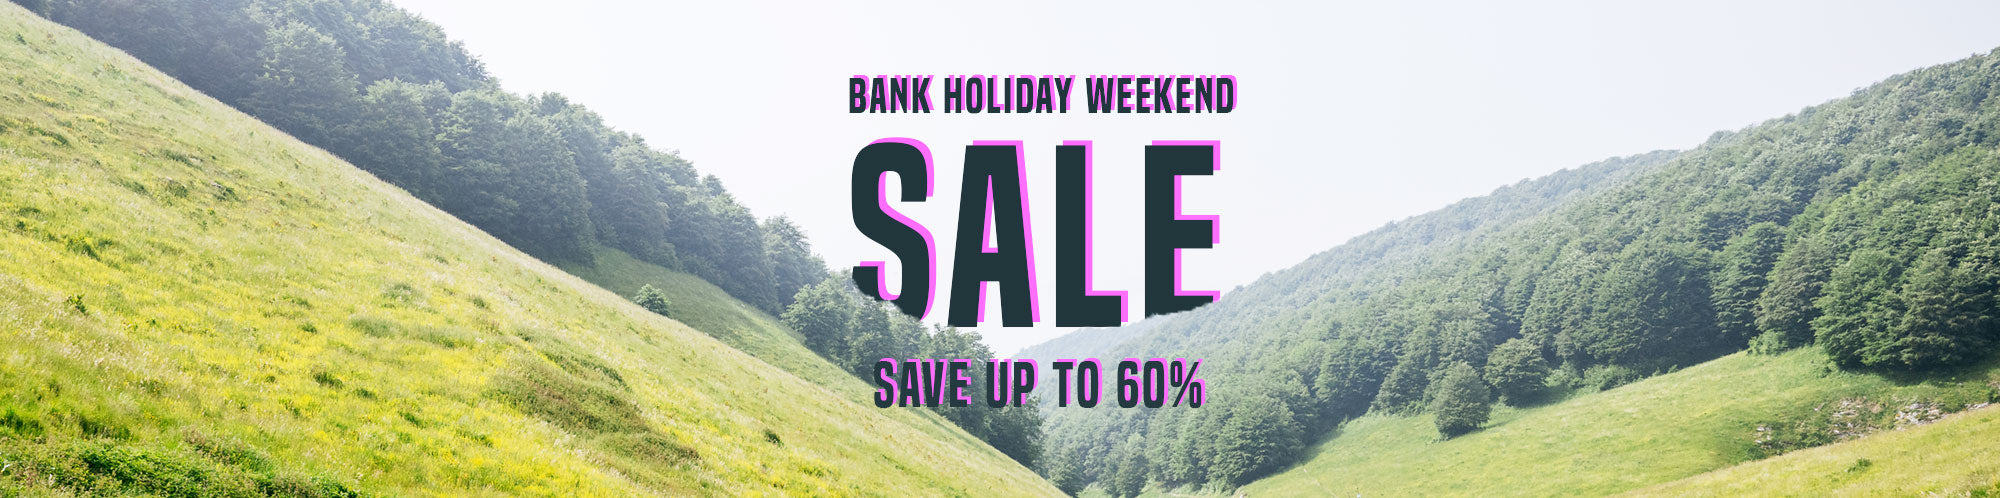 bank_holiday_weekend_sale_collection-banner.jpg__PID:f3511b0b-34d6-4f8a-94c2-6e9f3663f890